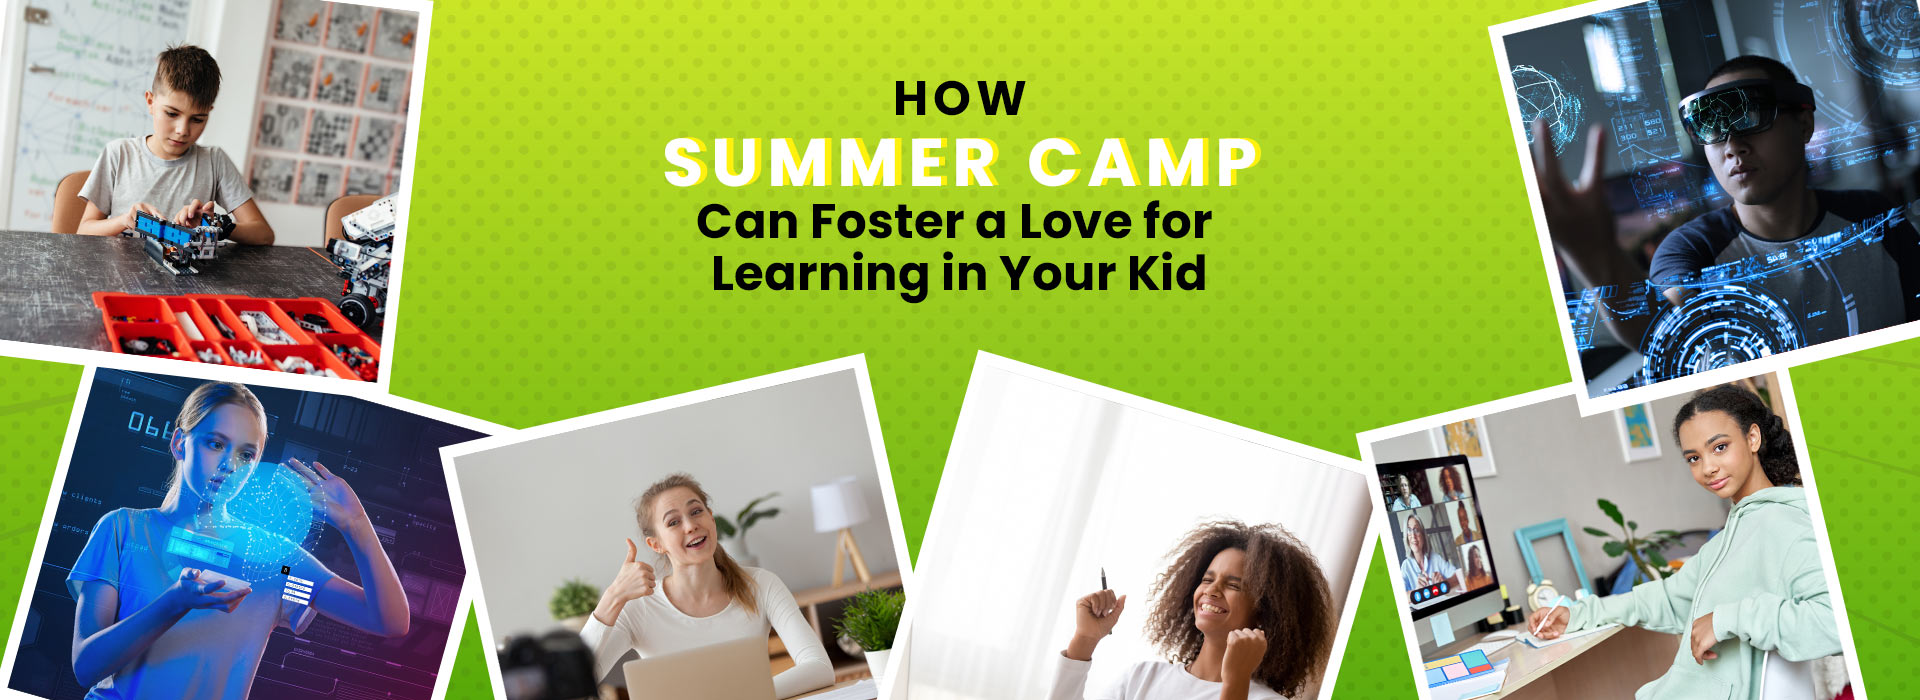 how summer camps foster learning in kids